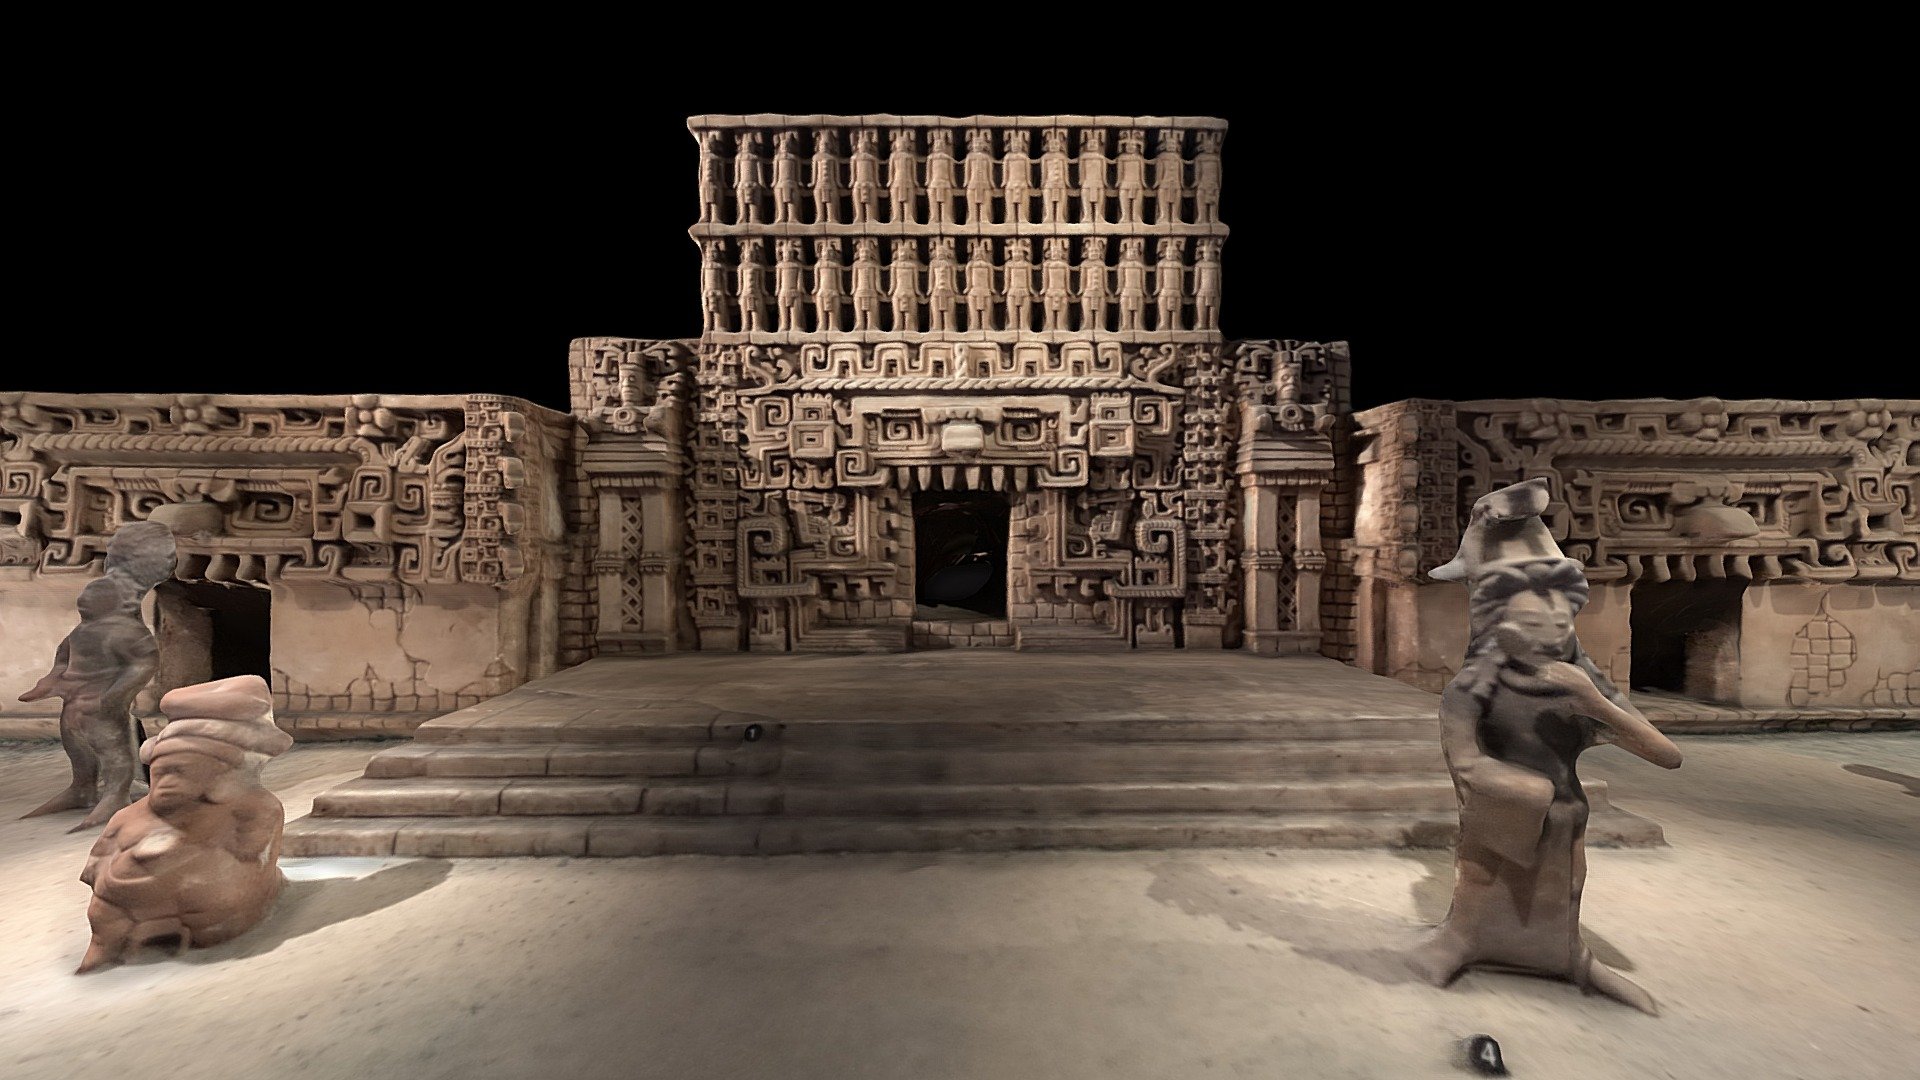 Created in RealityCapture by Capturing Reality from 156 images in 00h:25m:56s. 

Scan of a replica of the real temple in Mexico City 
https://www.themayanruinswebsite.com/hochob.html

austinbeaulier.com
https://sketchfab.com/Austin.Beaulier/store - Hochob Mayan Temple 3D scan ( photogrammetry ) - Buy Royalty Free 3D model by Austin Beaulier (@Austin.Beaulier) 3d model